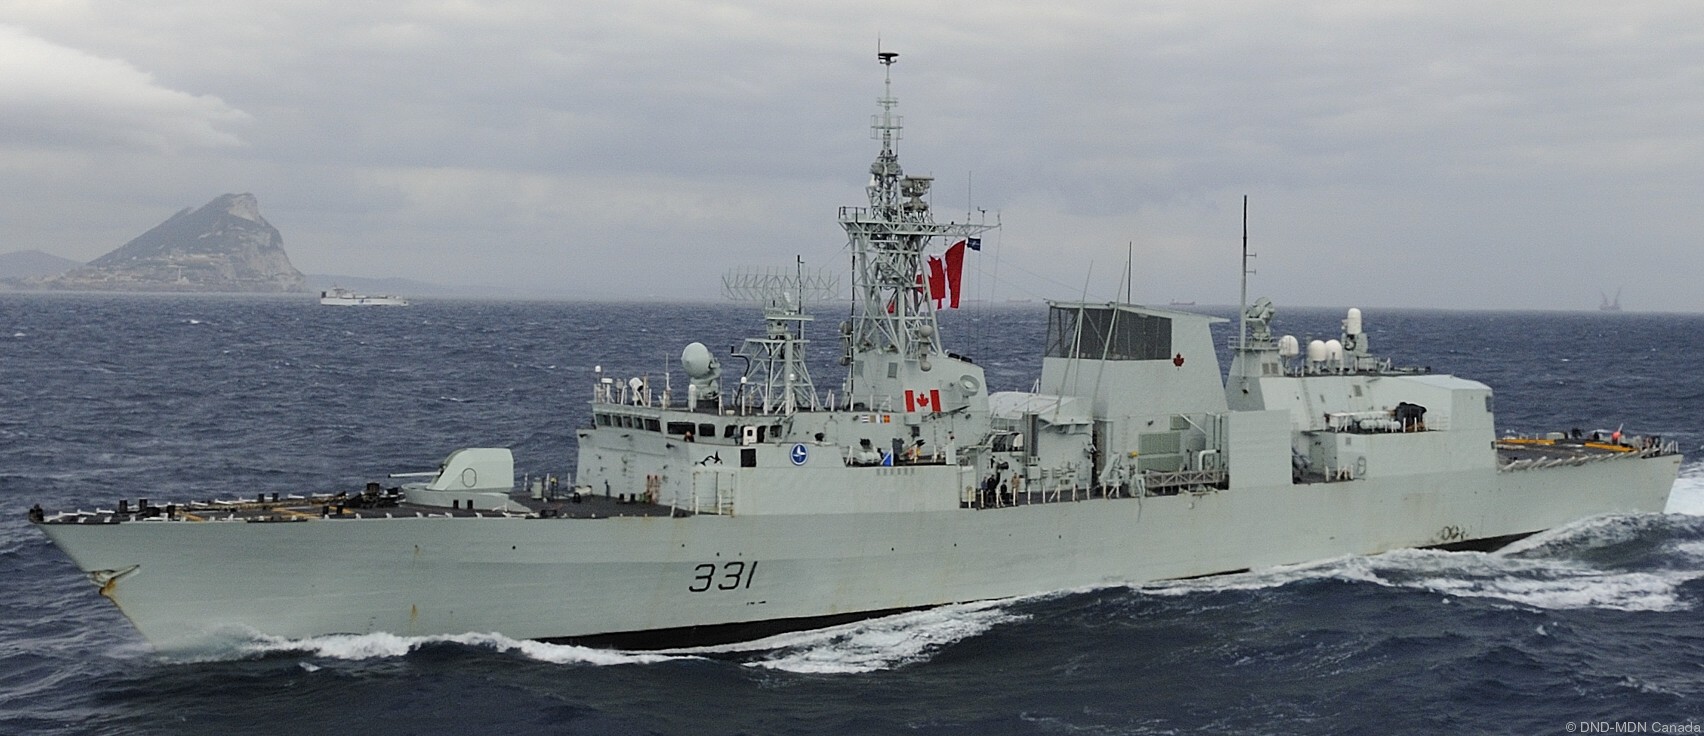 ffh-331 hmcs vancouver halifax class helicopter patrol frigate ncsm royal canadian navy 29 gibraltar